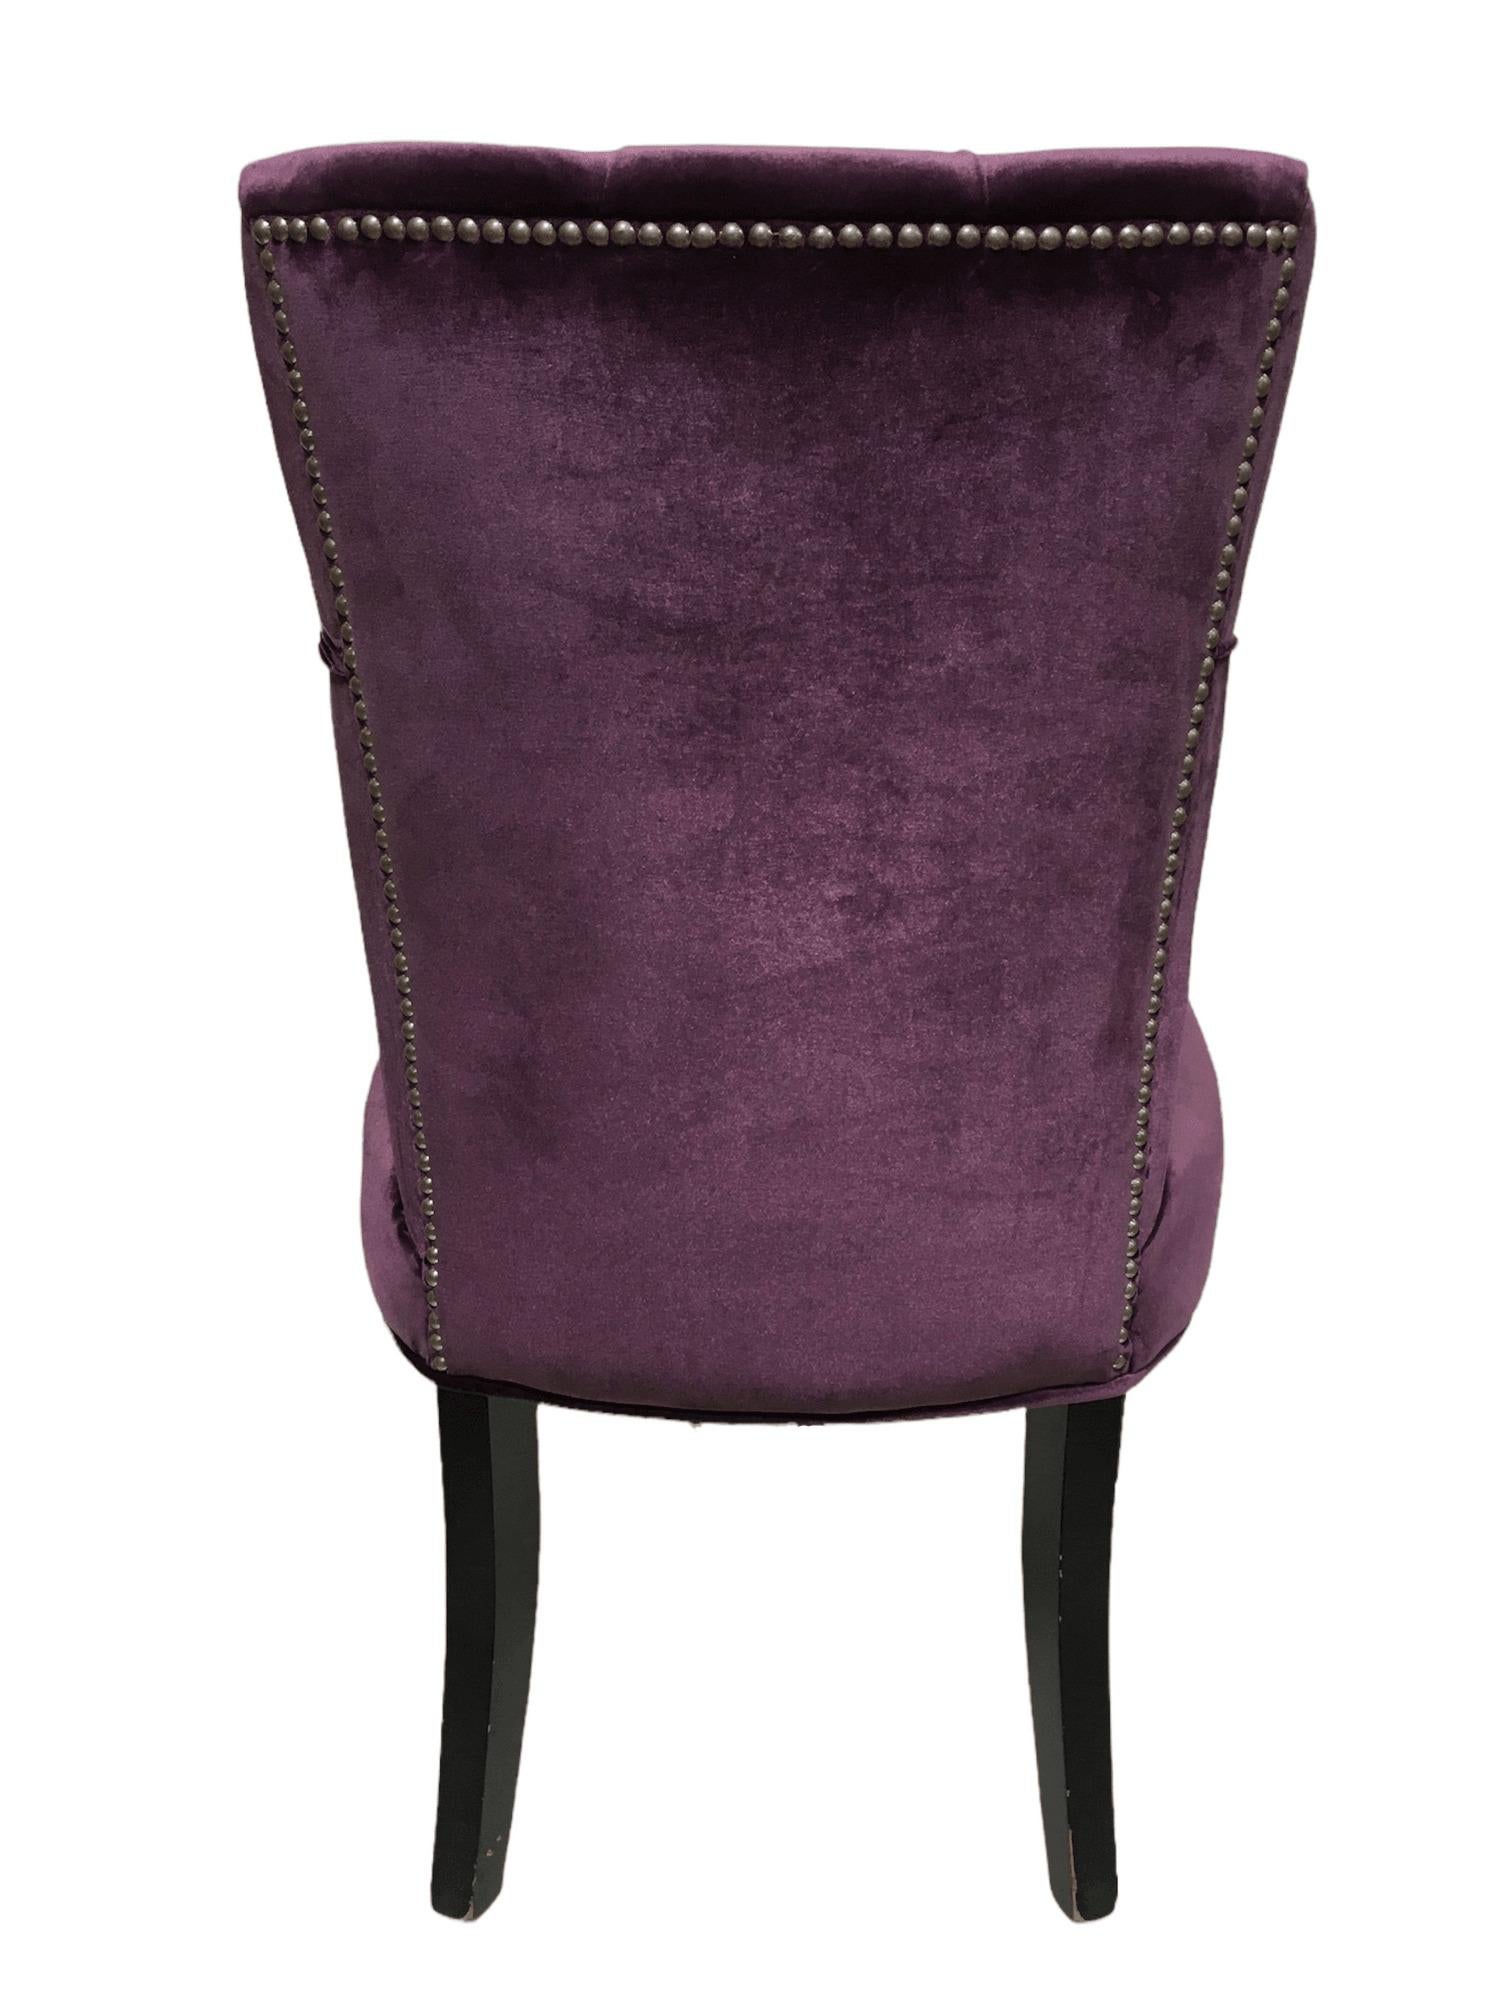 Vintage Purple Velvet Chairs with Tufted Padded Backrest. Set of 2 2